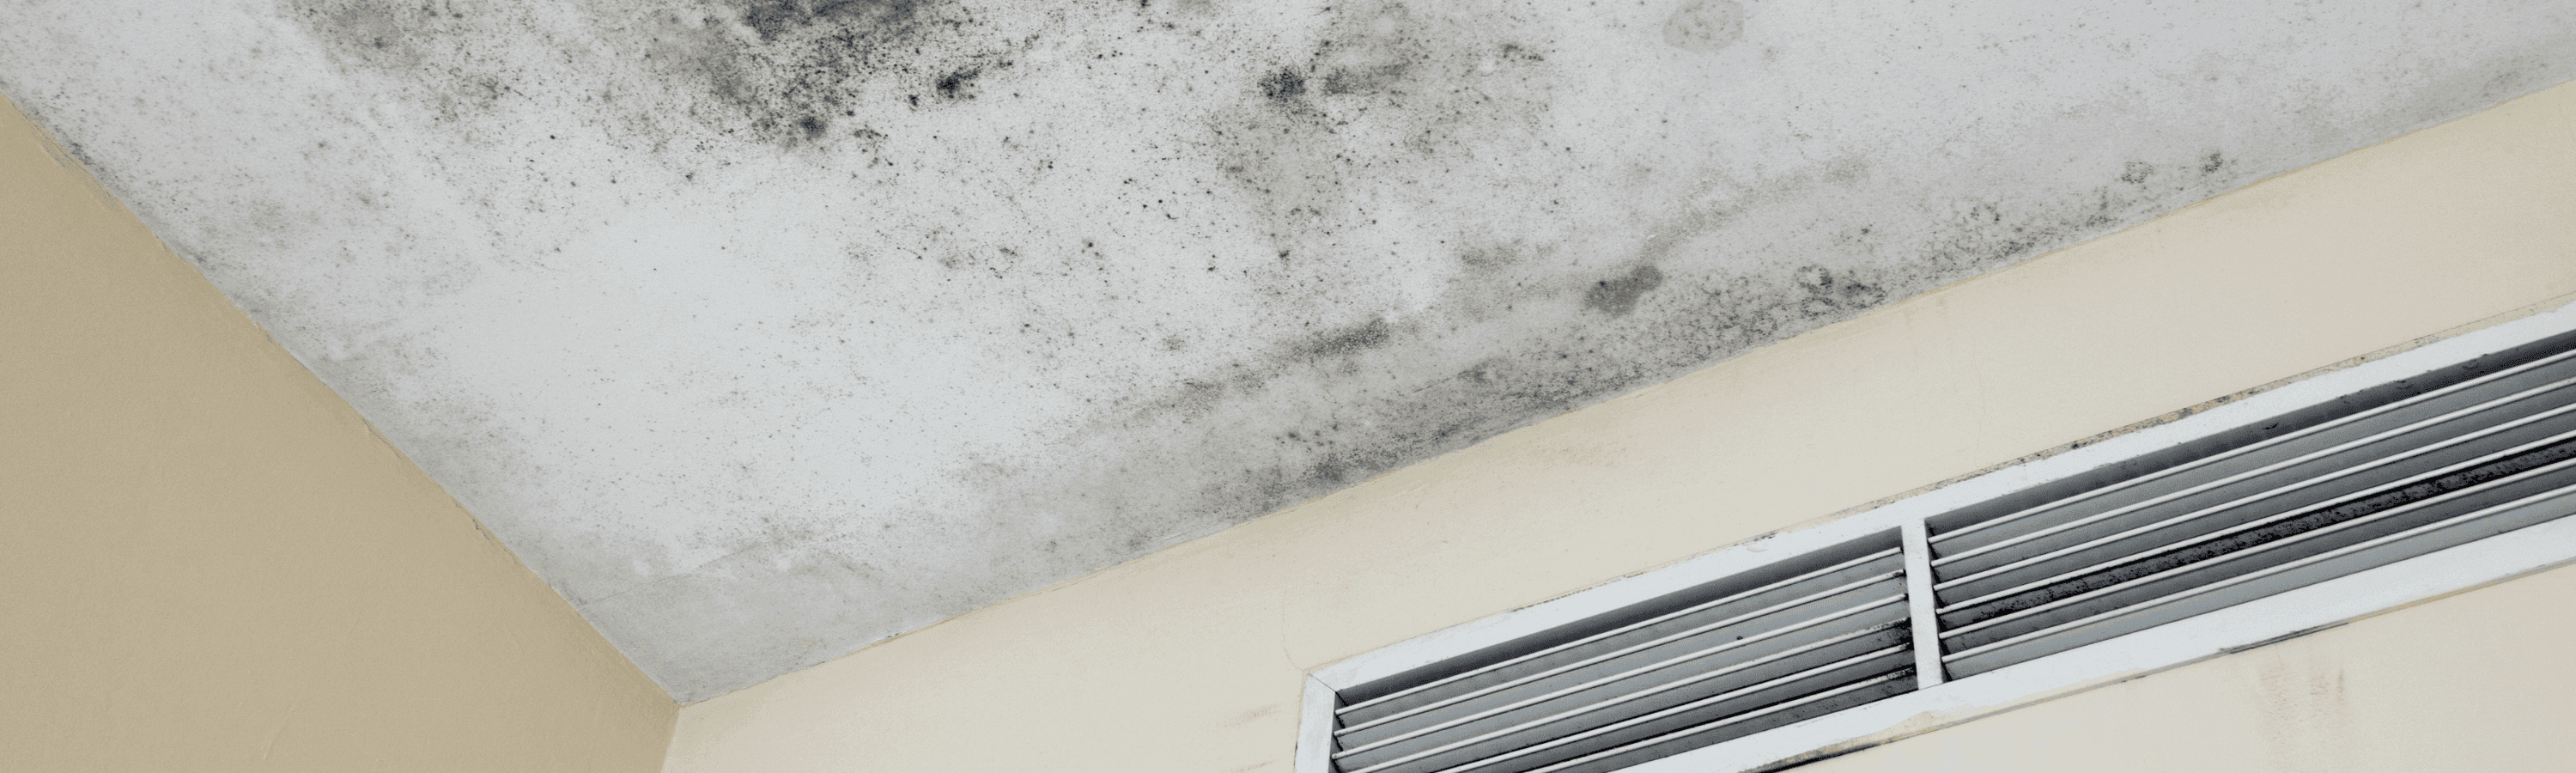 How do Home Inspectors Test for Mold